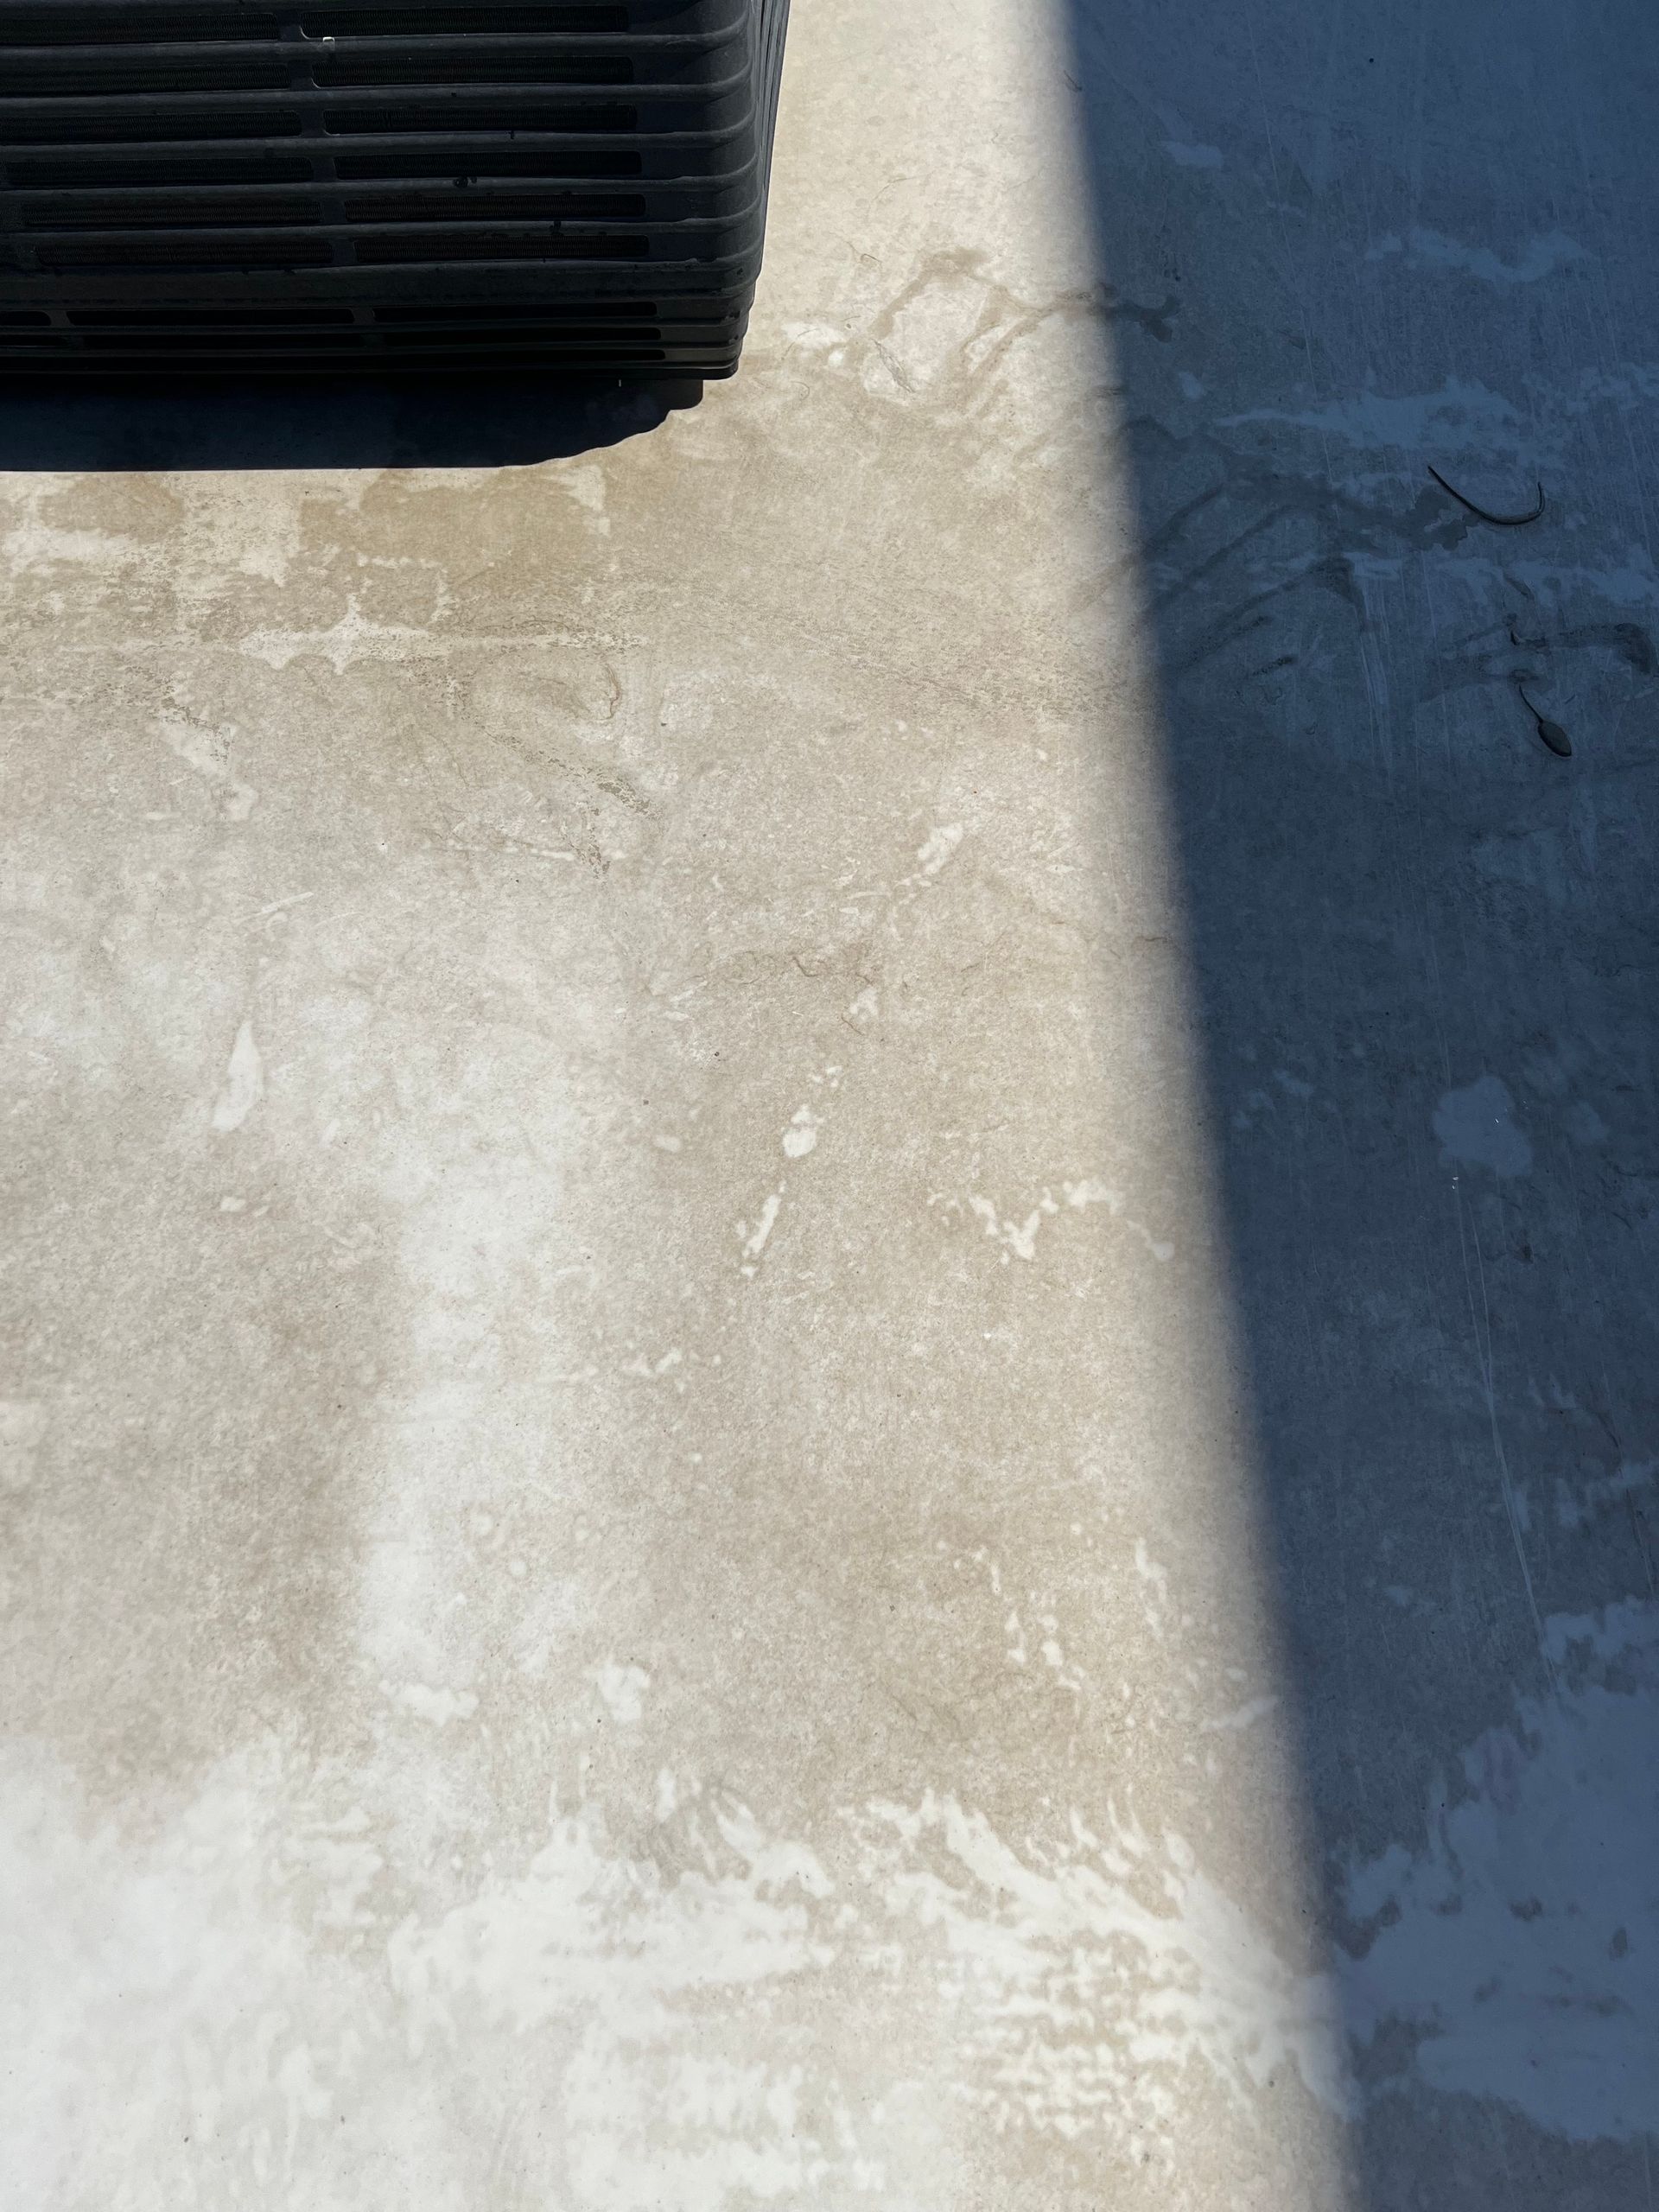 A shadow of a car is cast on a concrete surface